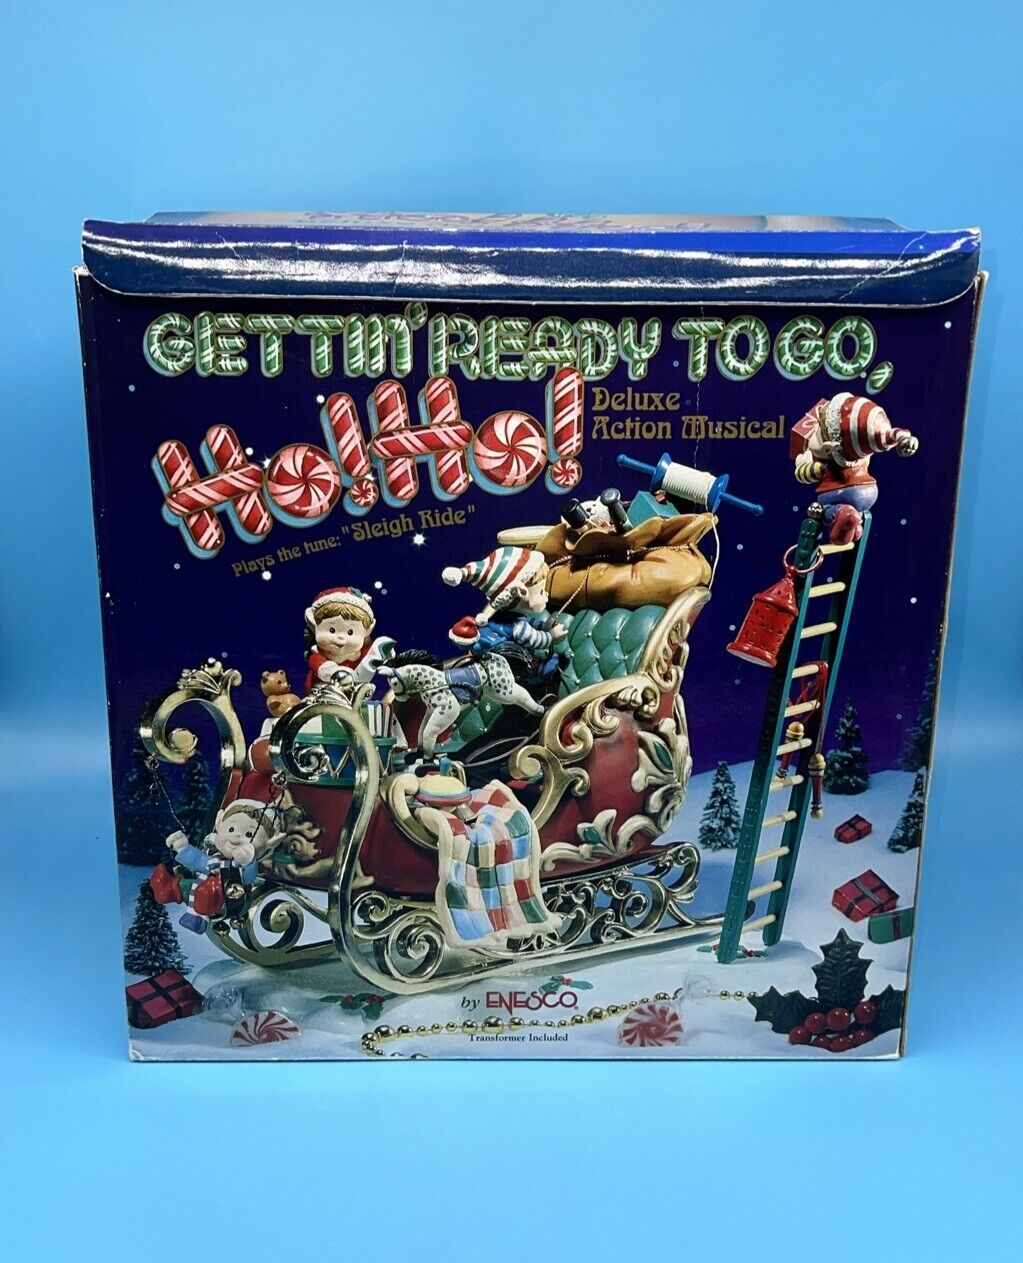 Enesco Gettin Ready to Go Christmas Deluxe Action Musical 1994 Sleigh Ride Works